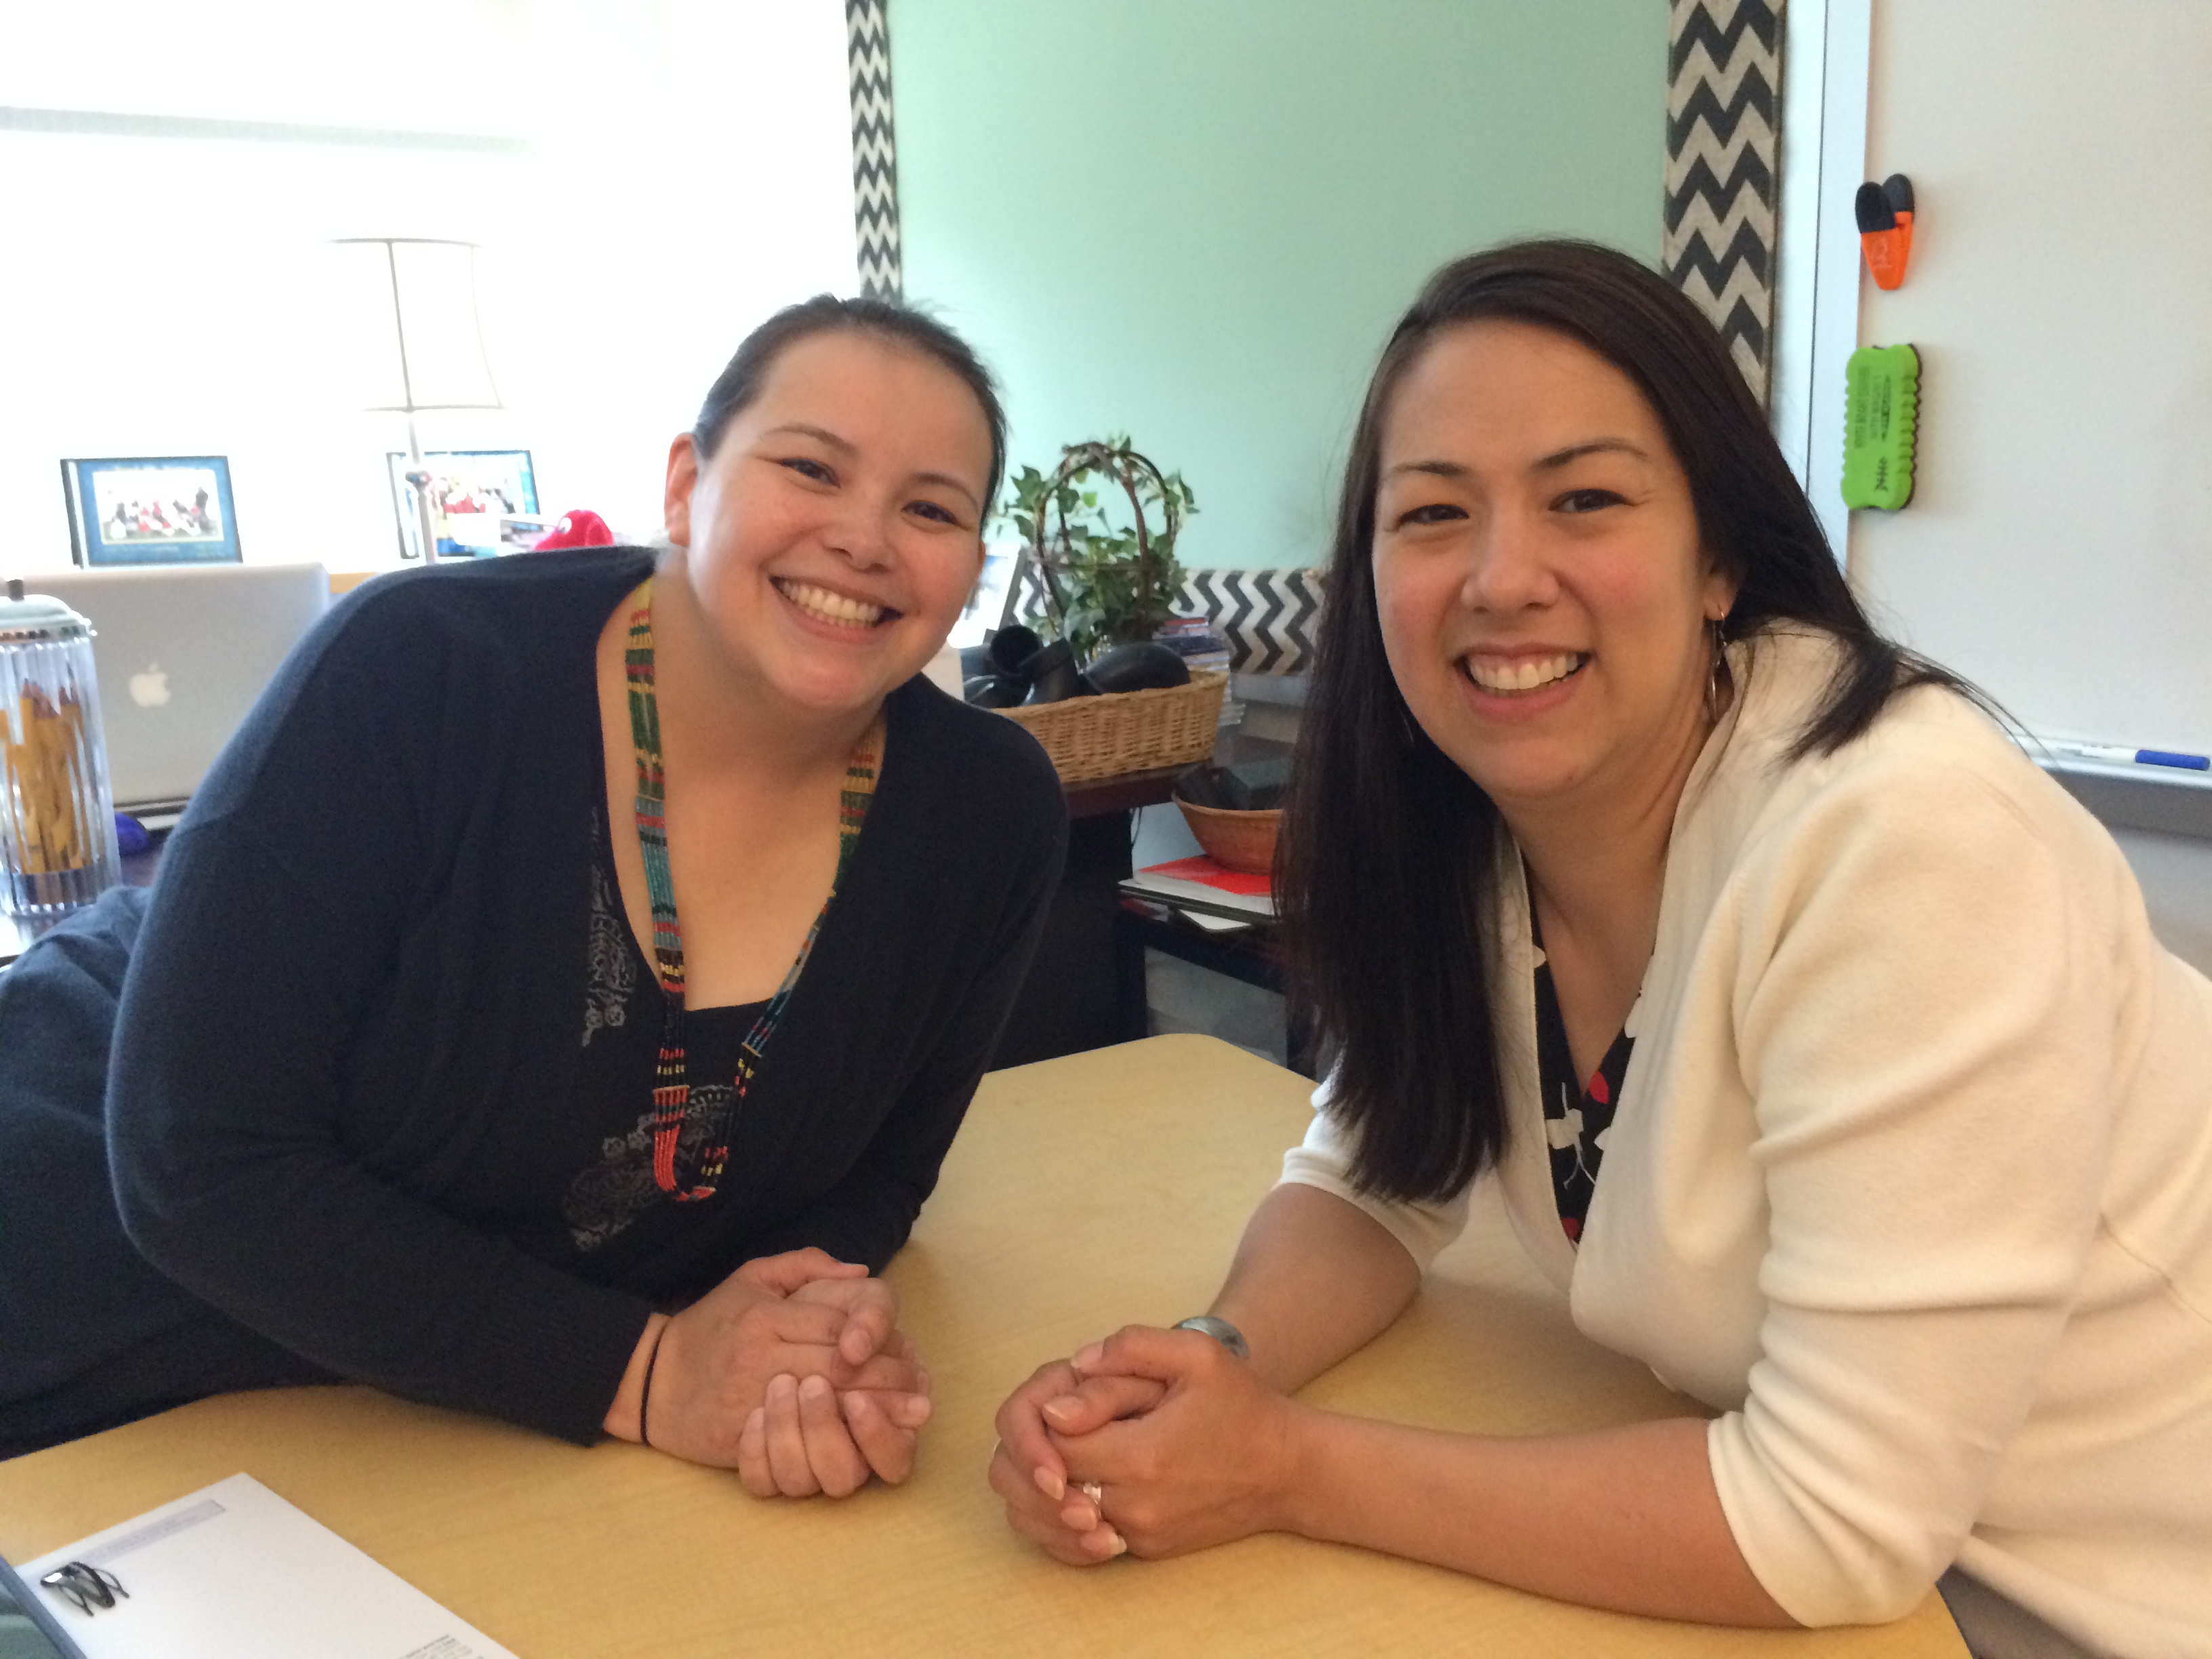 Jessica Chester (left) is a Tlingit language specialist that works in Eddy's classroom. Shgen George has been with the program since 2002 and teaches a combination fourth- and fifth-grade class. (Photo by Scott Burton/KTOO)